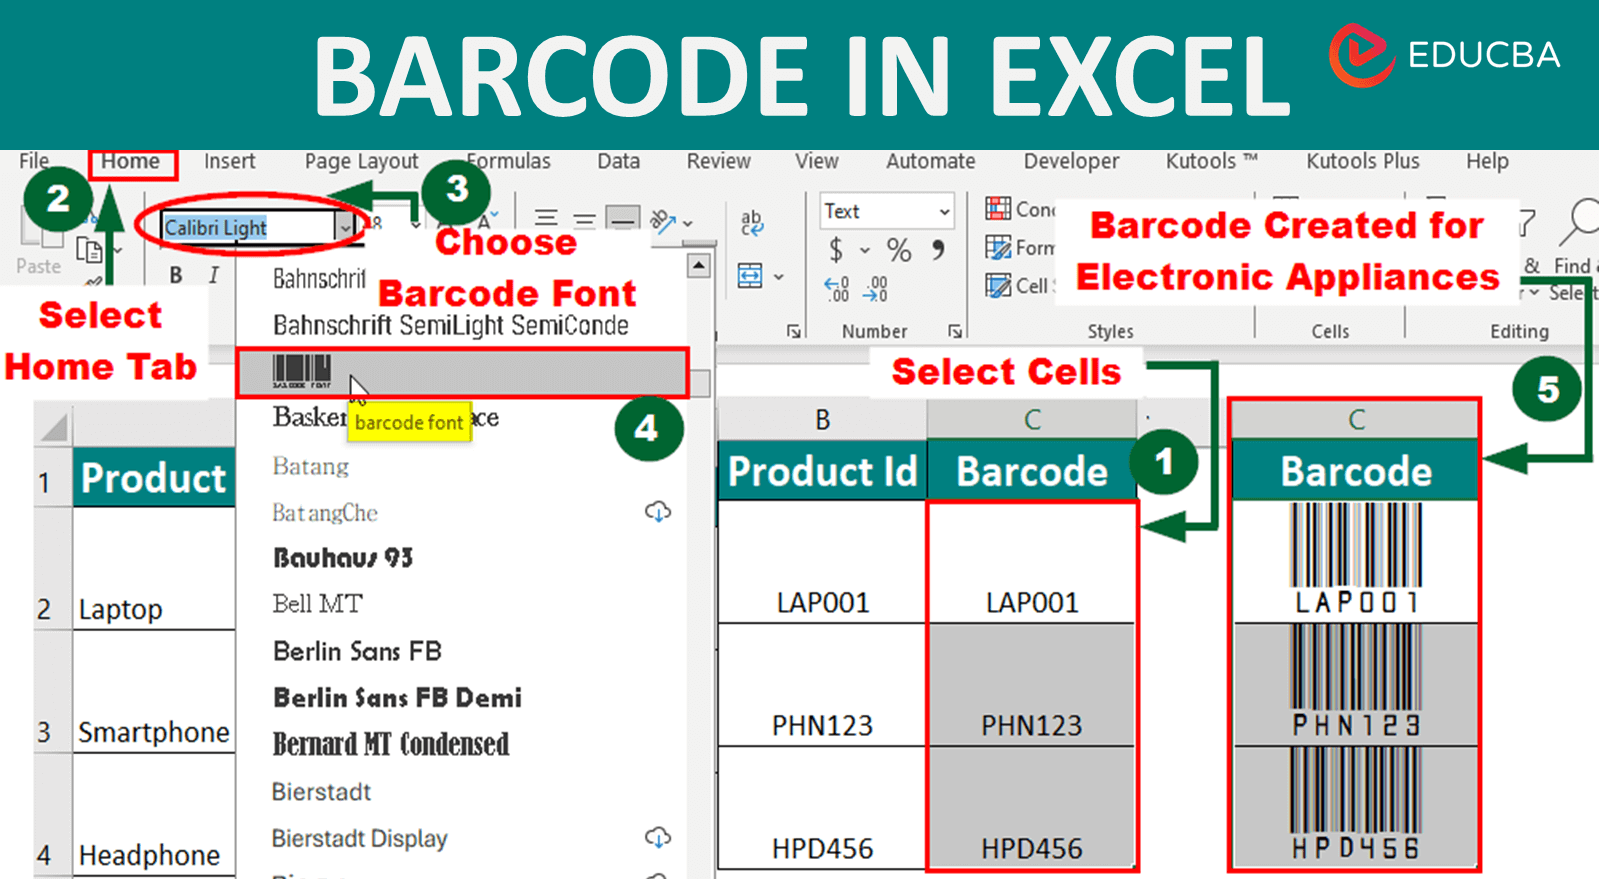 How to create barcode in excel